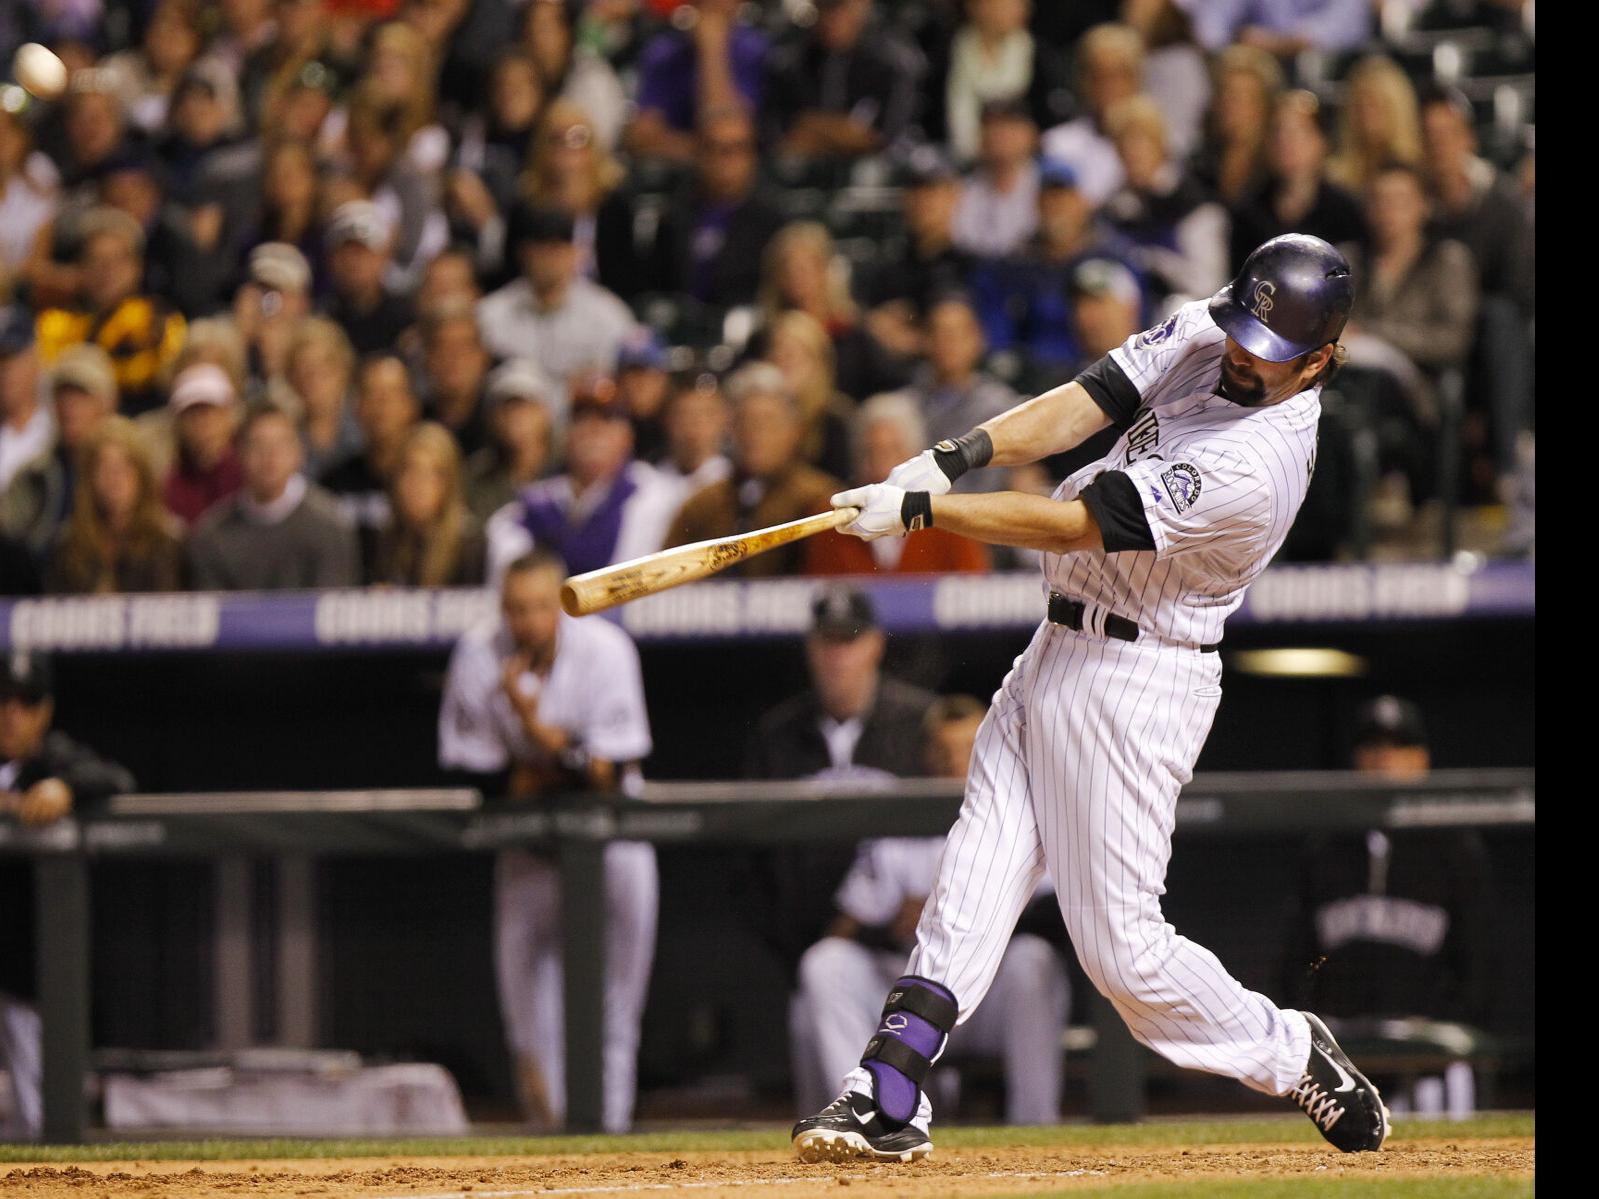 Rockies legend Todd Helton not elected to hall of fame, but inching